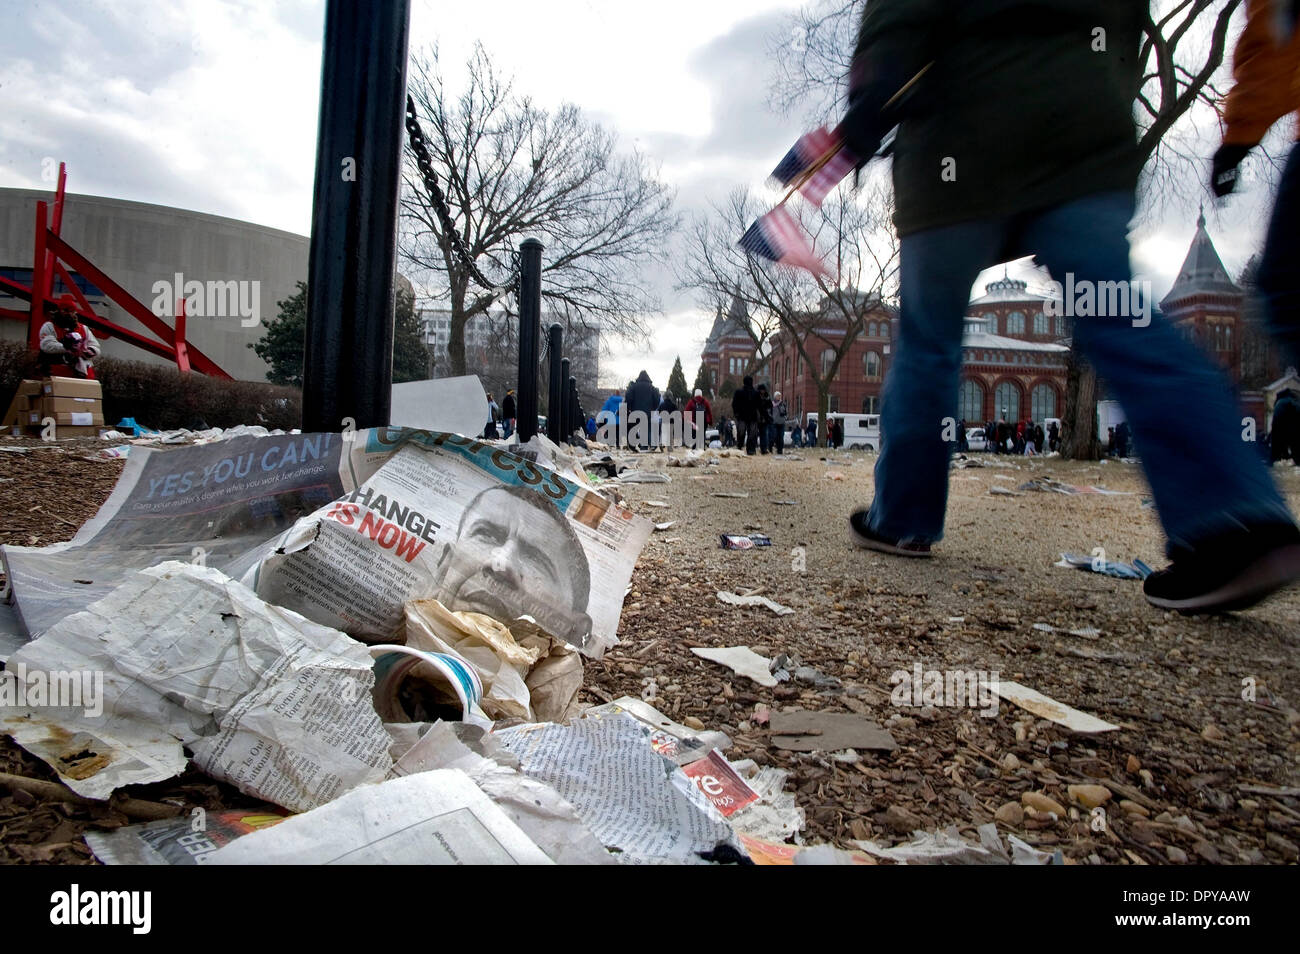 Jan 20, 2009 - Washington, District of Columbia, USA - People walk past discarded newspapers as they leave the National Mall following the inauguration of Obama as the 44th President of the United States. (Credit Image: © Pete Marovich/ZUMA Press) Stock Photo